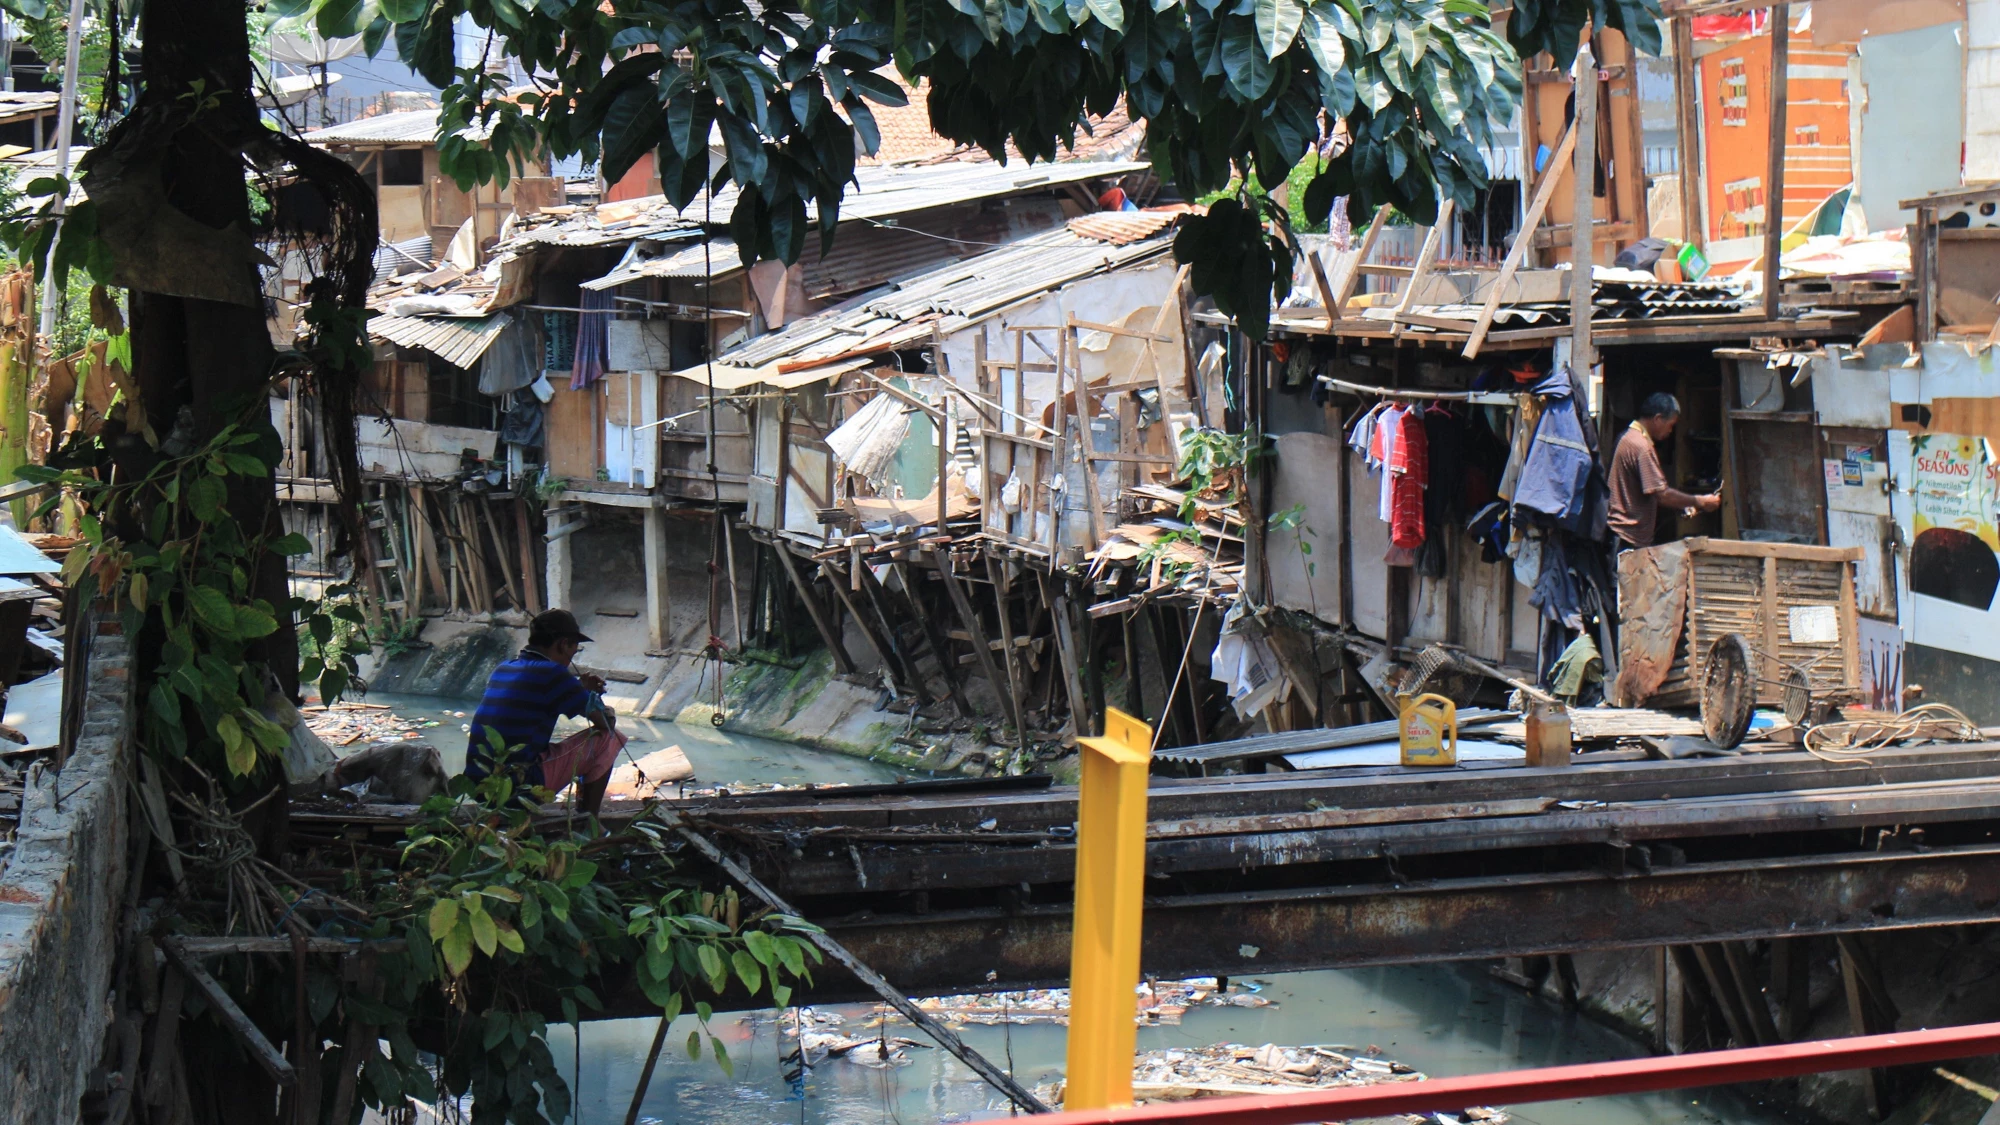 Currently, only 2 percent of households in the core of Jakarta, which has a population of 10 million, are connected to the public sewerage system